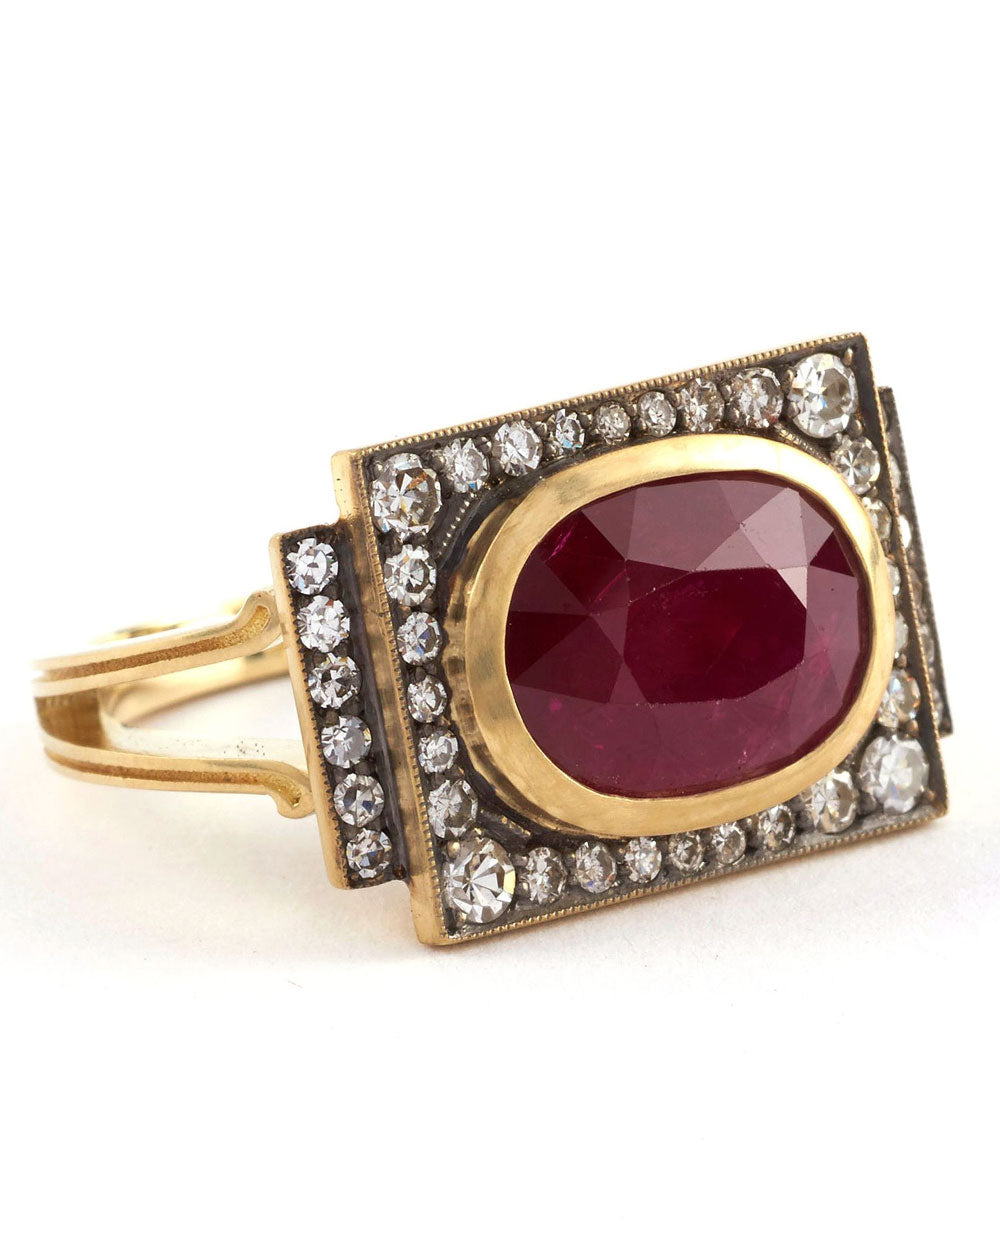 Mozambique Ruby Renee Ring